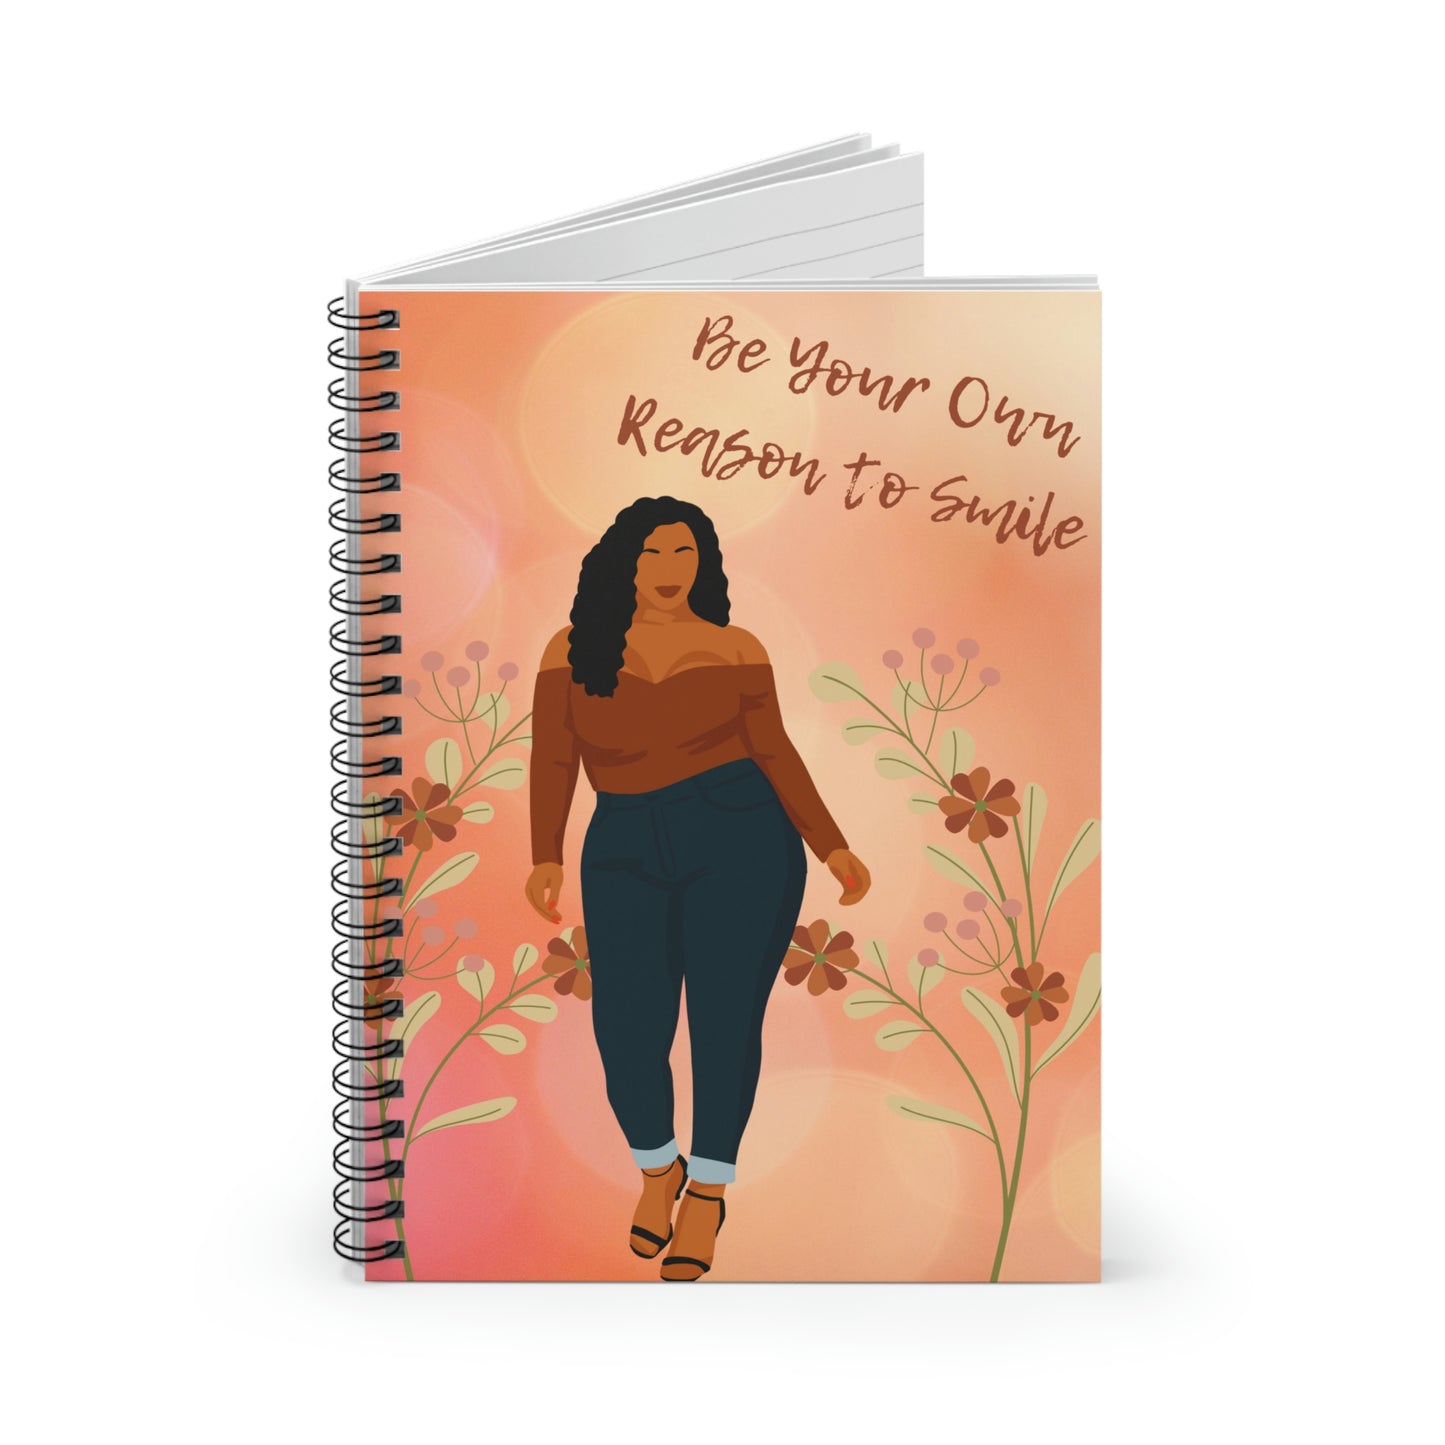 Be Your Own Reason 1 Spiral Notebook/Journal